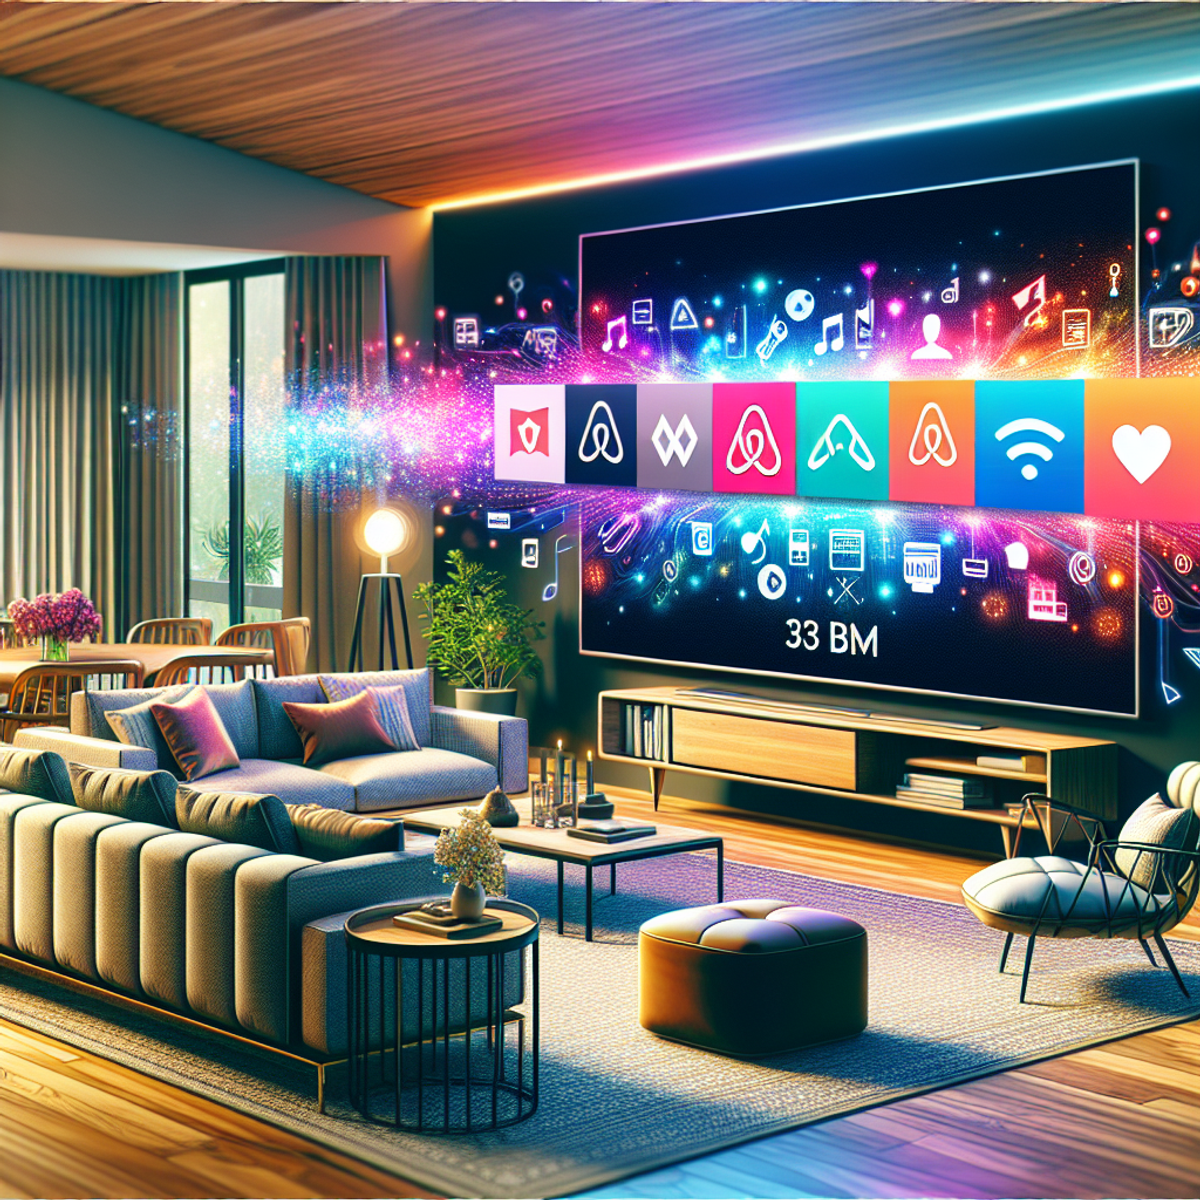 A modern living room with a sleek design, featuring the best TV for Airbnb at the center emitting vibrant colors. The room is designed for group viewing, with comfortable seating and symbols representing popular streaming platforms.